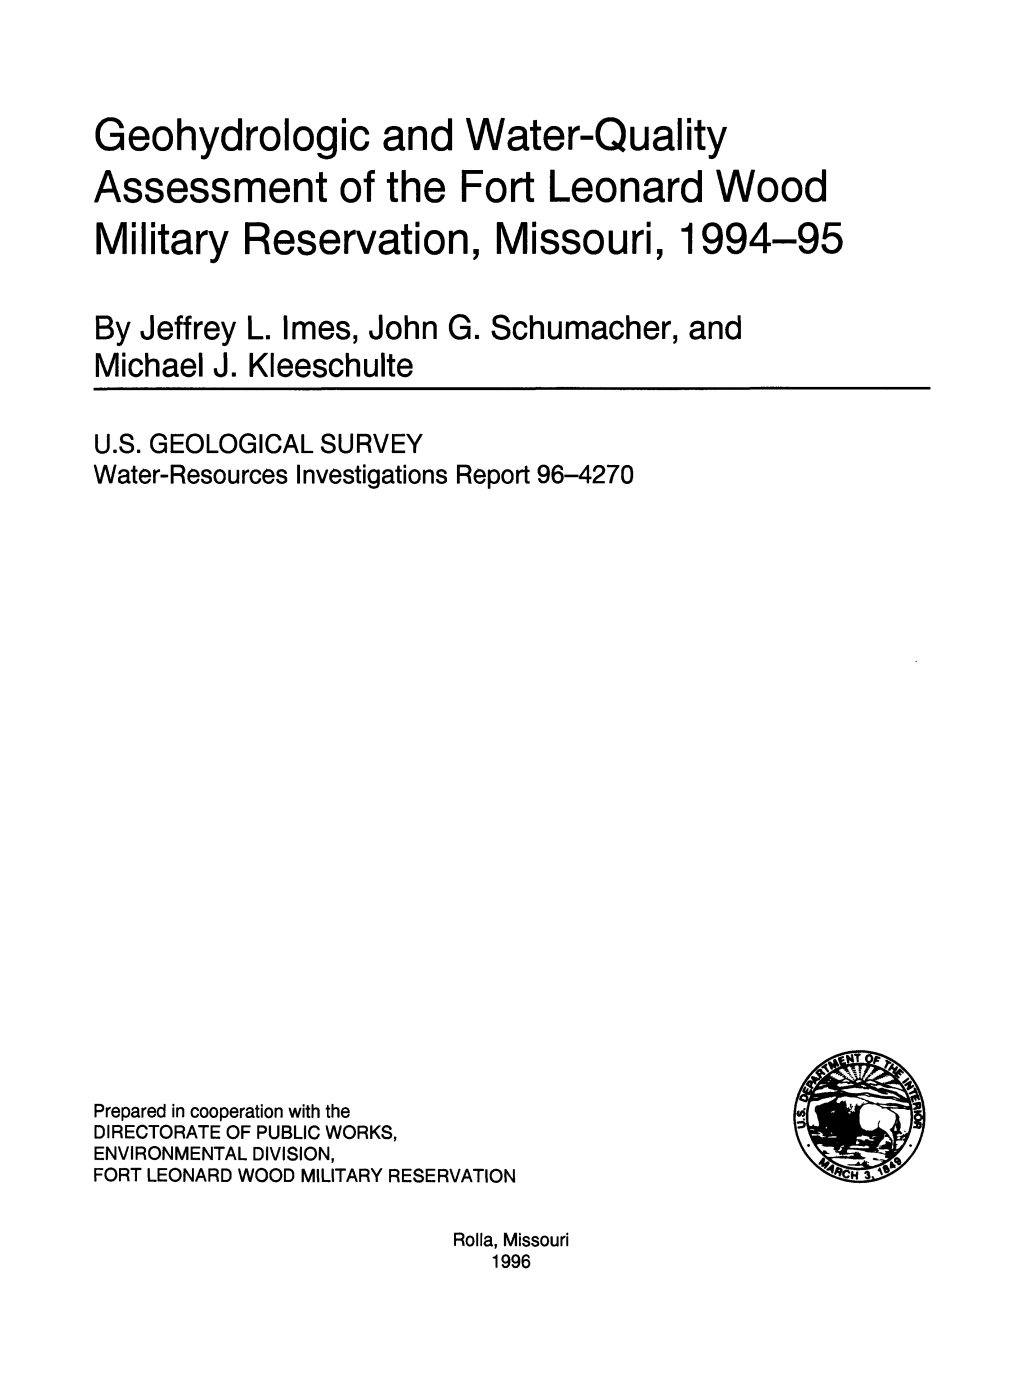 Geohydrologic and Water-Quality Assessment of the Fort Leonard Wood Military Reservation, Missouri, 1994-95